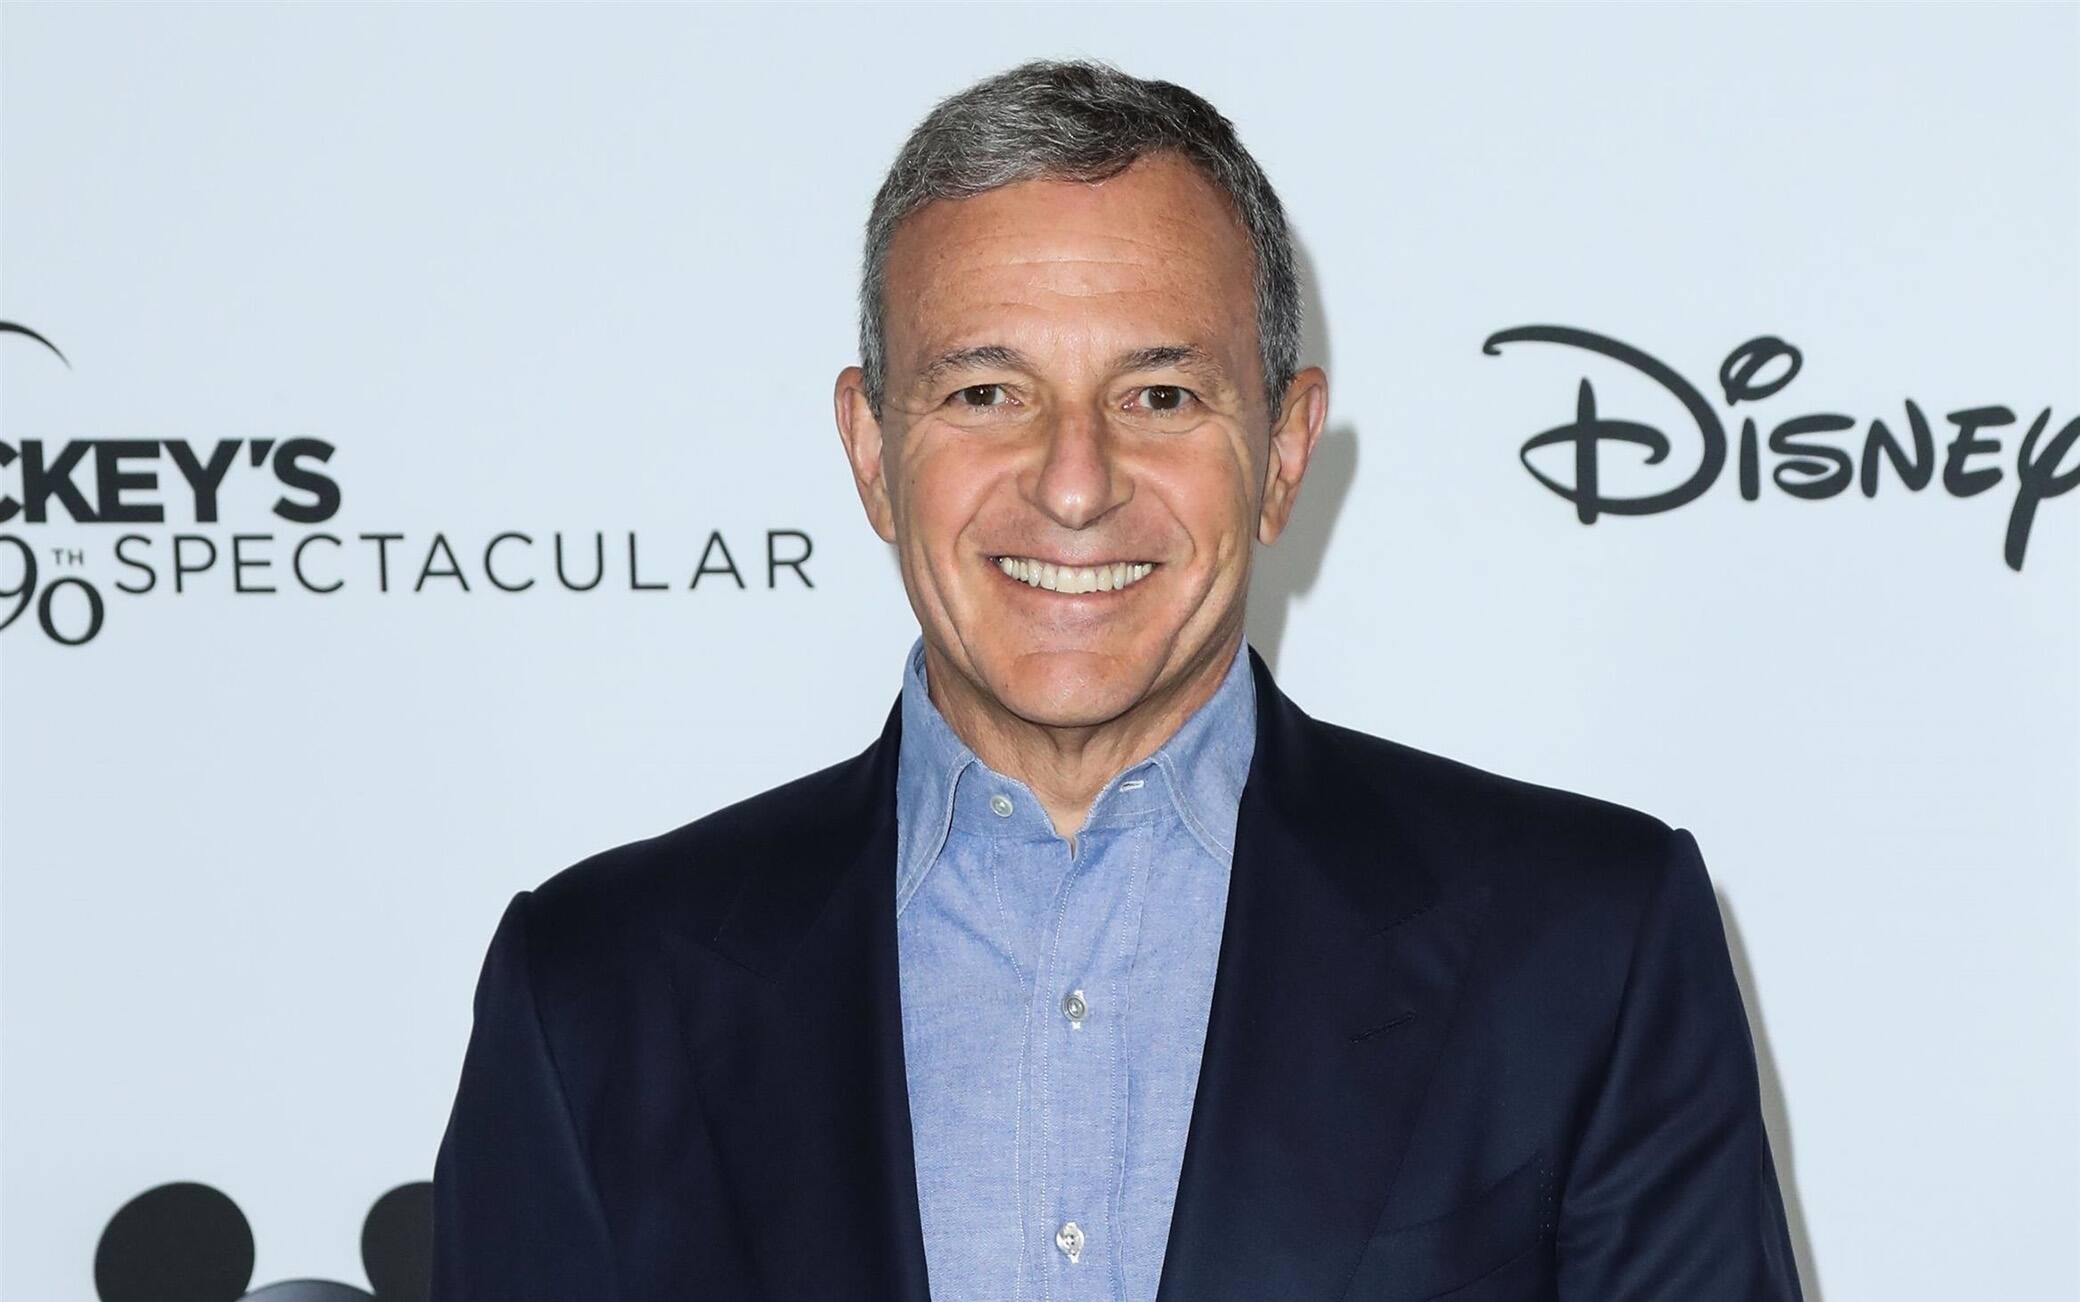 Los Angeles, CA  - **FILE PHOTOS** Disney's Bob Iger Is Giving Up His Entire Salary During Coronavirus COVID-19 Pandemic. 

LOS ANGELES, CALIFORNIA, USA - OCTOBER 06: Executive Chairman and Former Chief Executive Officer of The Walt Disney Company Bob Iger and Mickey Mouse arrive at Mickey's 90th Spectacular held at The Shrine Auditorium and Expo Hall on October 6, 2018 in Los Angeles, California, United States.

Pictured: Bob Iger

BACKGRID USA 30 MARCH 2020 

BYLINE MUST READ: Image Press / BACKGRID

USA: +1 310 798 9111 / usasales@backgrid.com

UK: +44 208 344 2007 / uksales@backgrid.com

*UK Clients - Pictures Containing Children
Please Pixelate Face Prior To Publication*